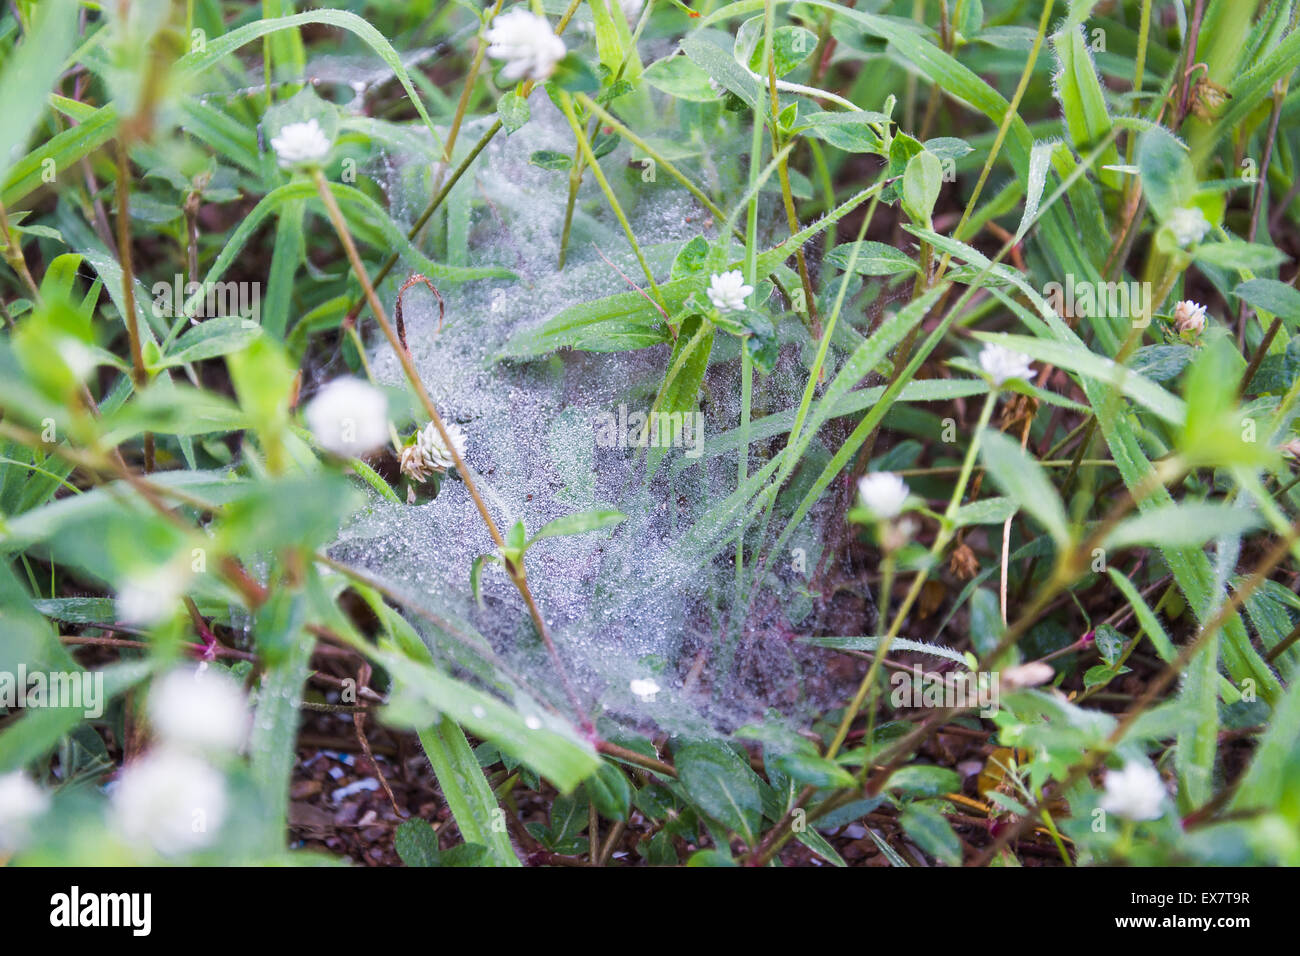 Spider web in backyard after raining Stock Photo